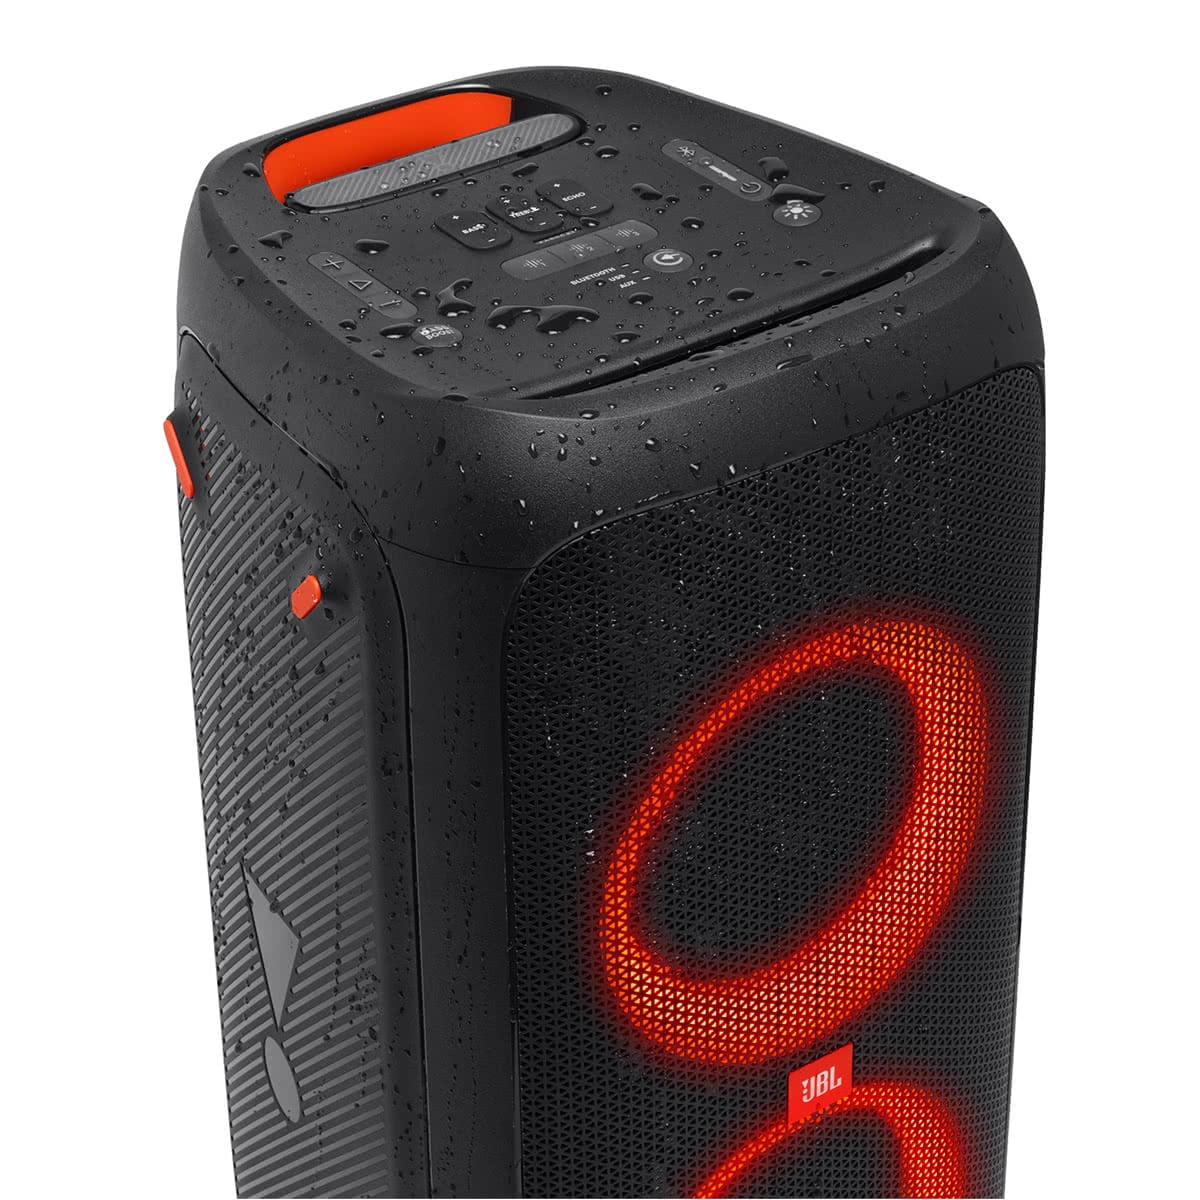 JBL PartyBox 310 Bluetooth Portable Party Speaker with Dazzling - Walmart.com